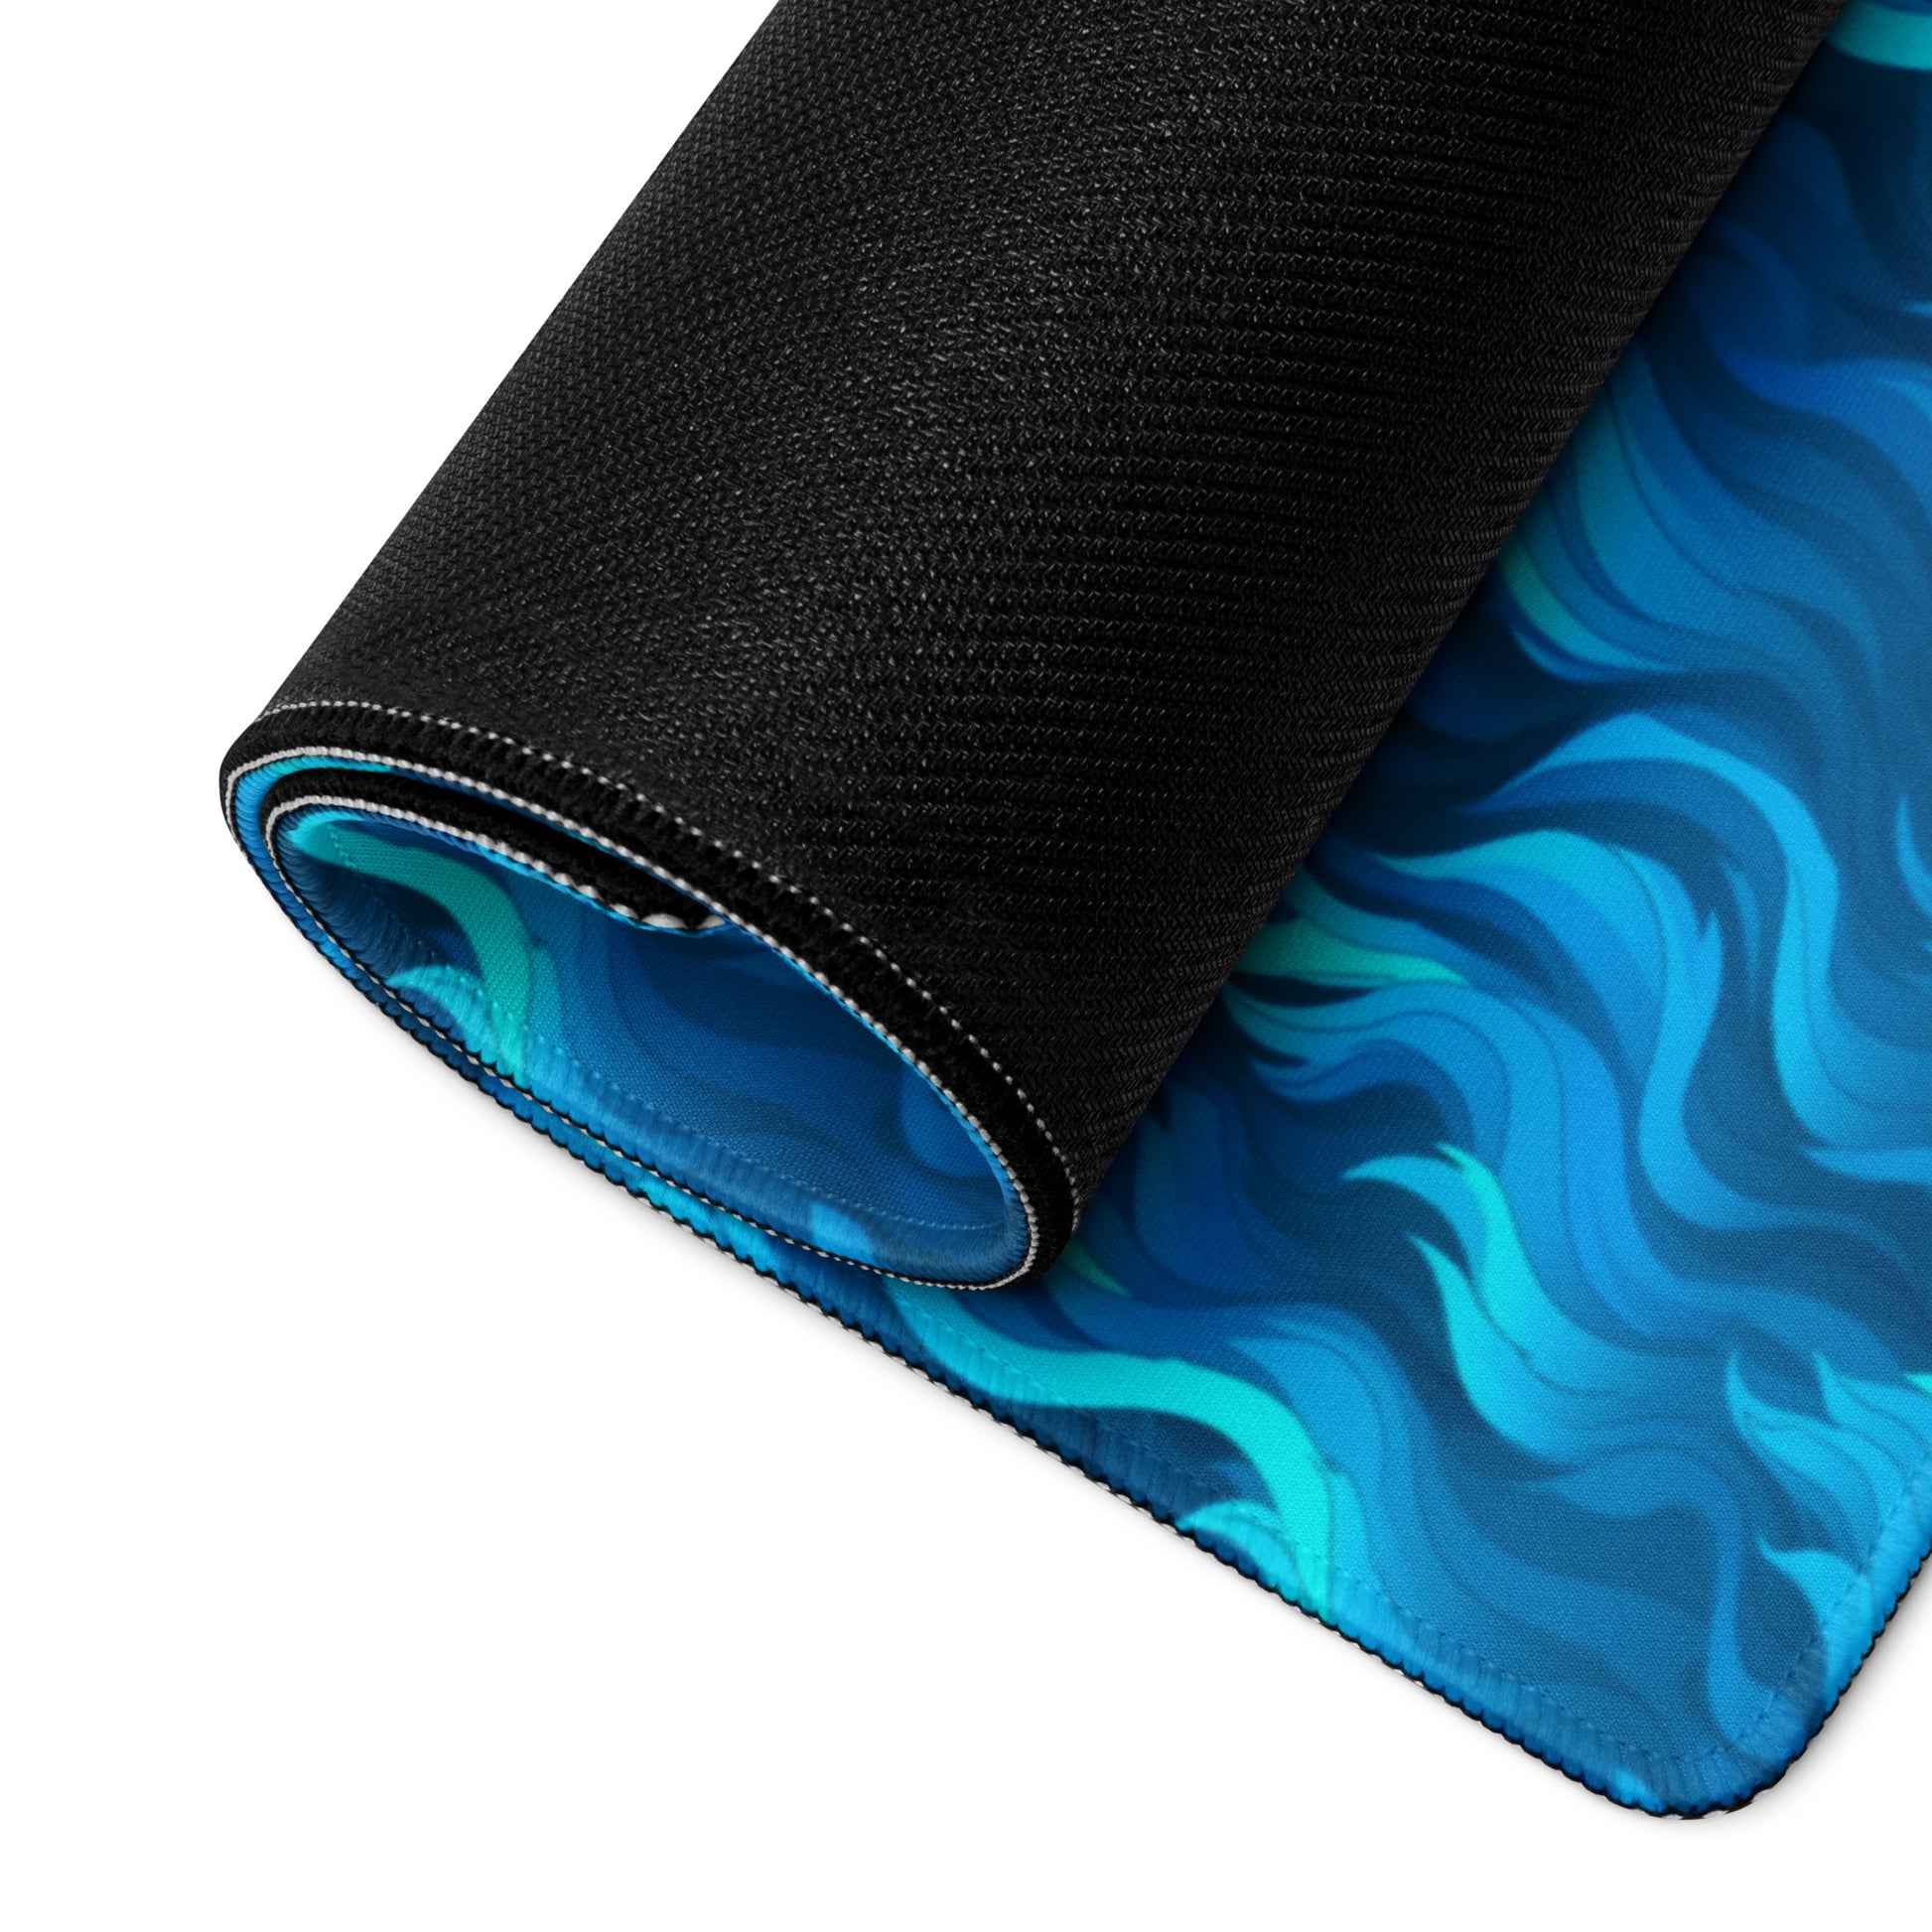 A 36" x 18" desk pad with a wavy flame pattern on it rolled up. Blue in color.